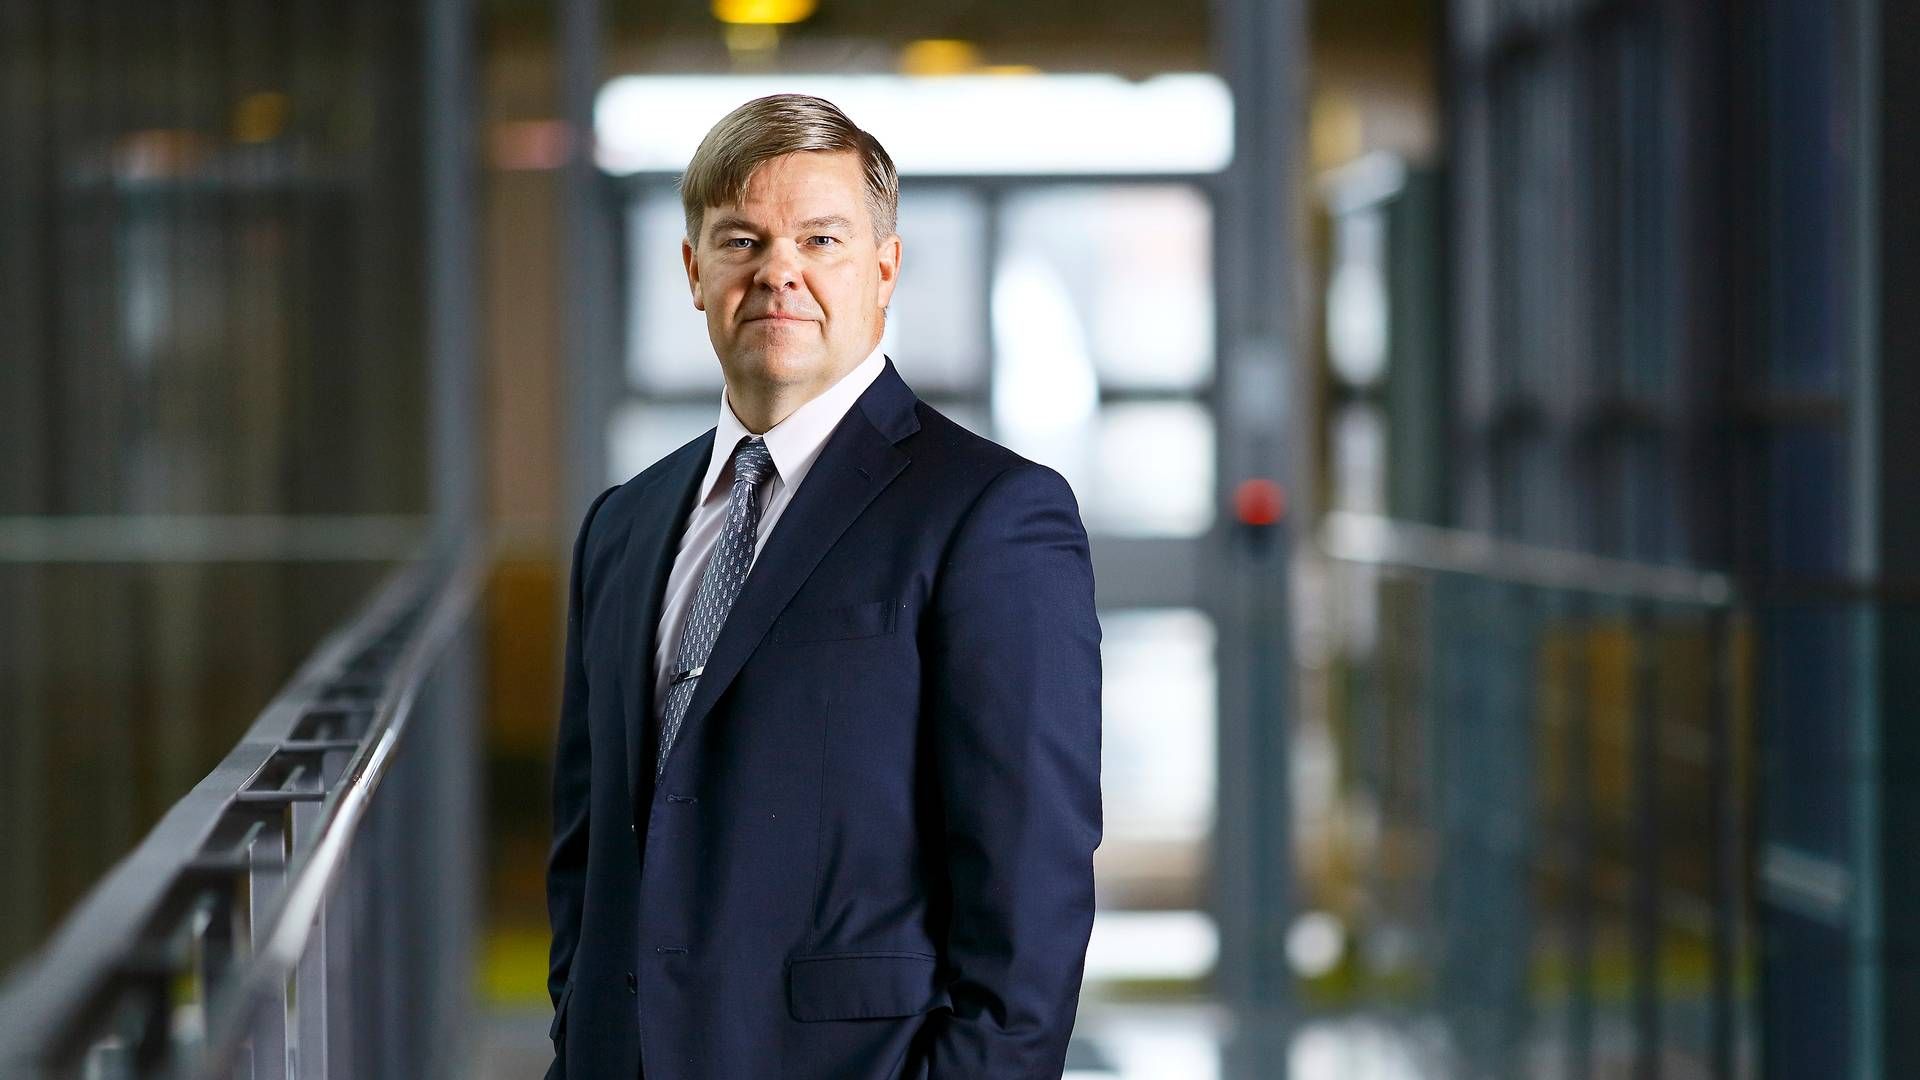 According to Mikko Mursula of Ilmarinen, passive strategies are an important part of the company's overall investment strategy. | Photo: Ilmarinen/pr